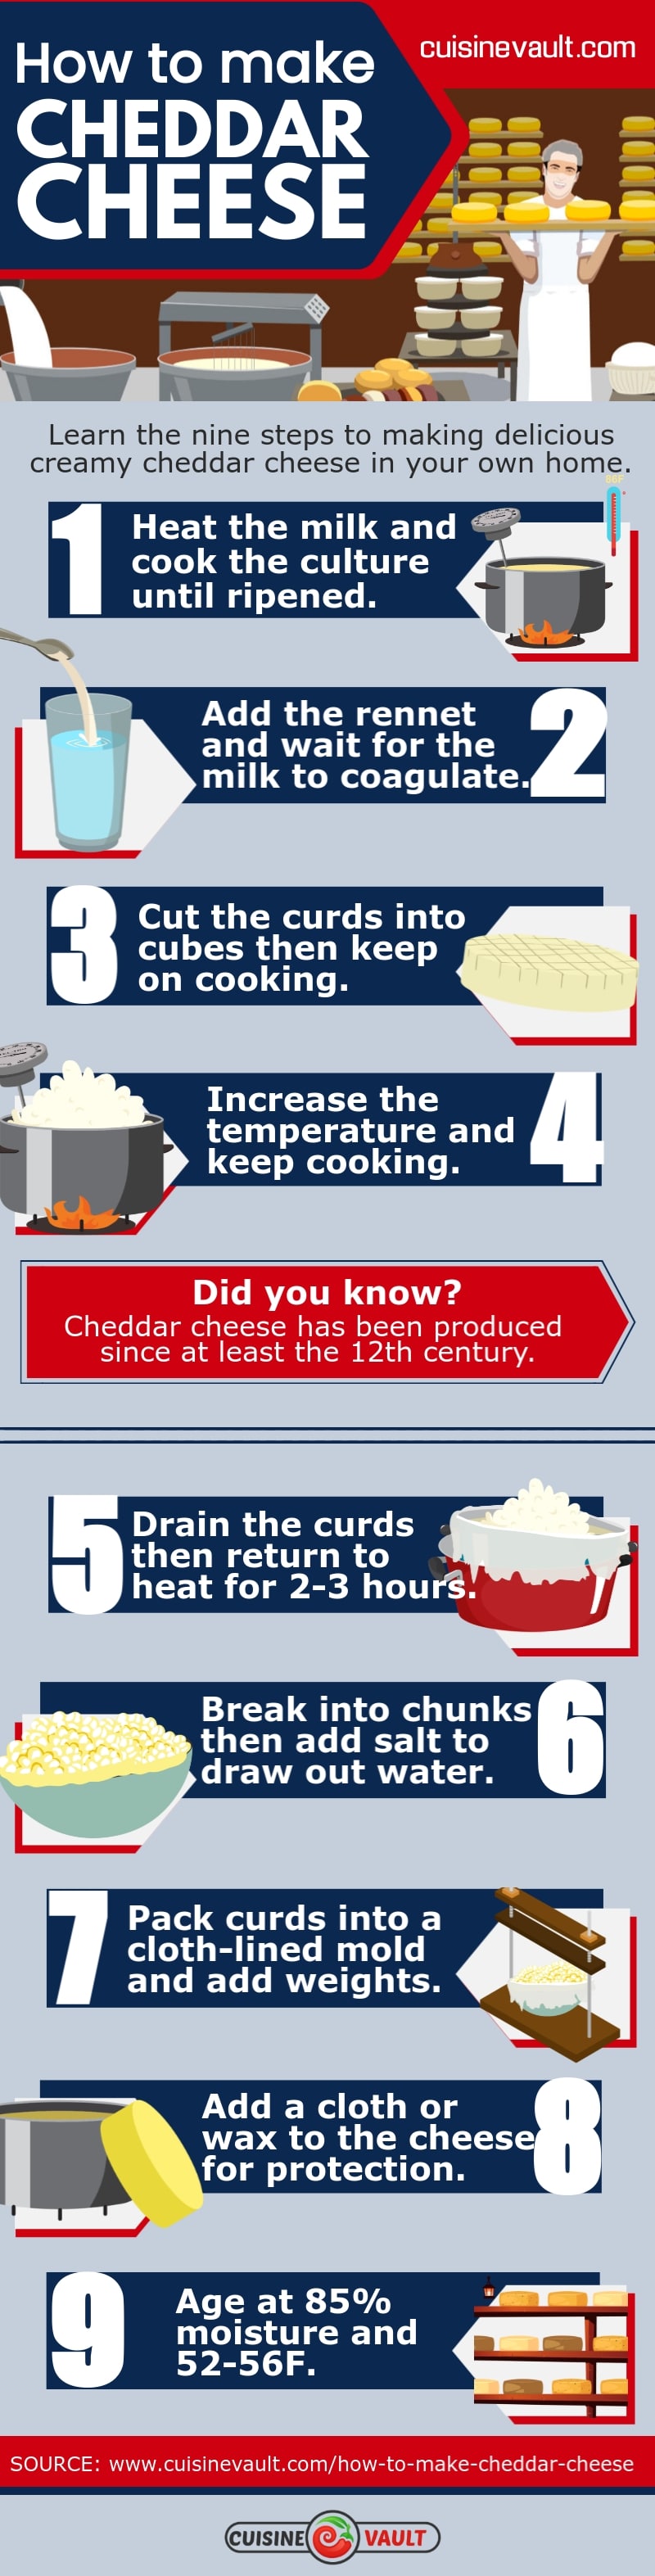 How to make cheddar cheese infographic